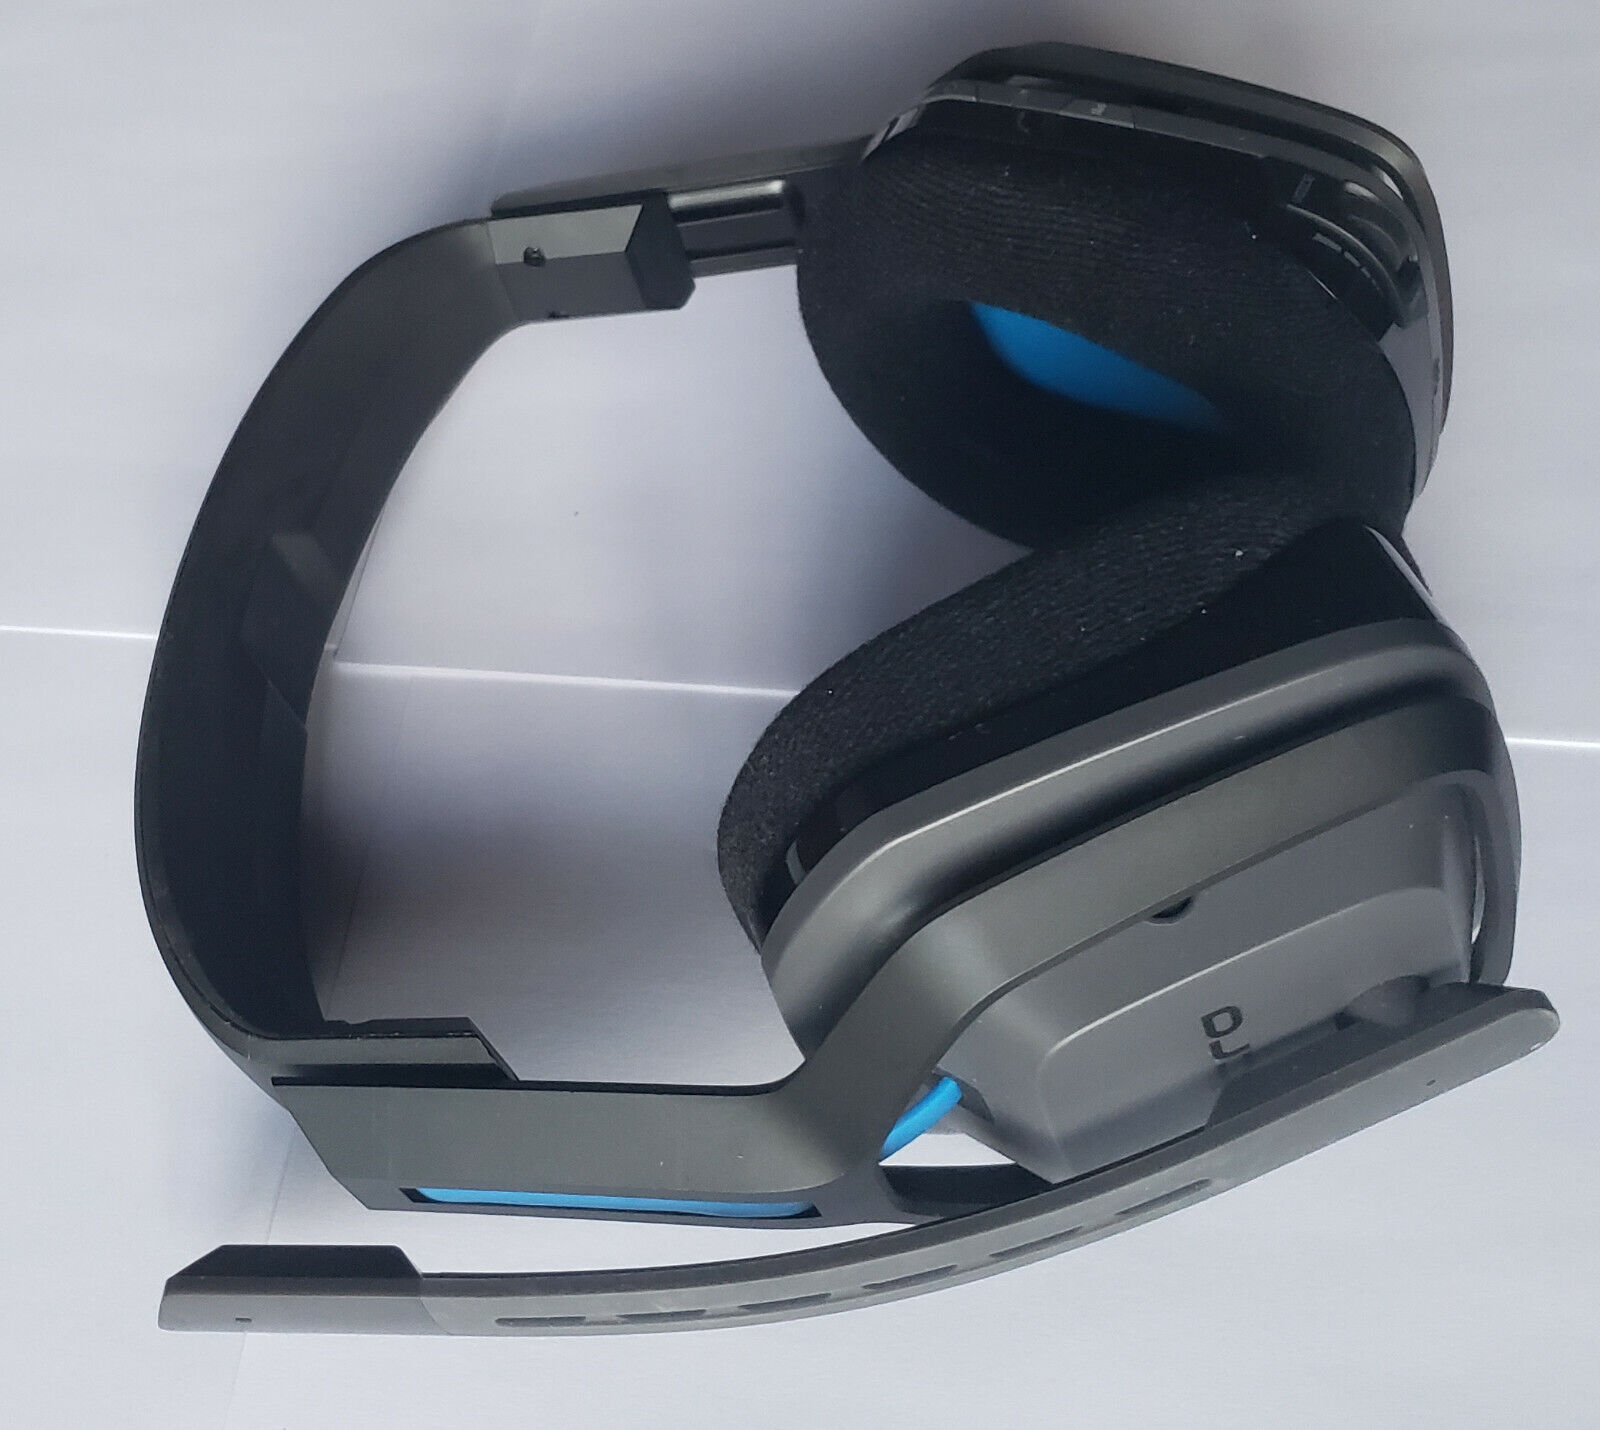 wees gegroet binnen vanavond USED ASTRO Gaming A20 Wireless HEADSET ONLY for Sony PS4 PC MAC - GRAY BLUE  97855136886 | eBay